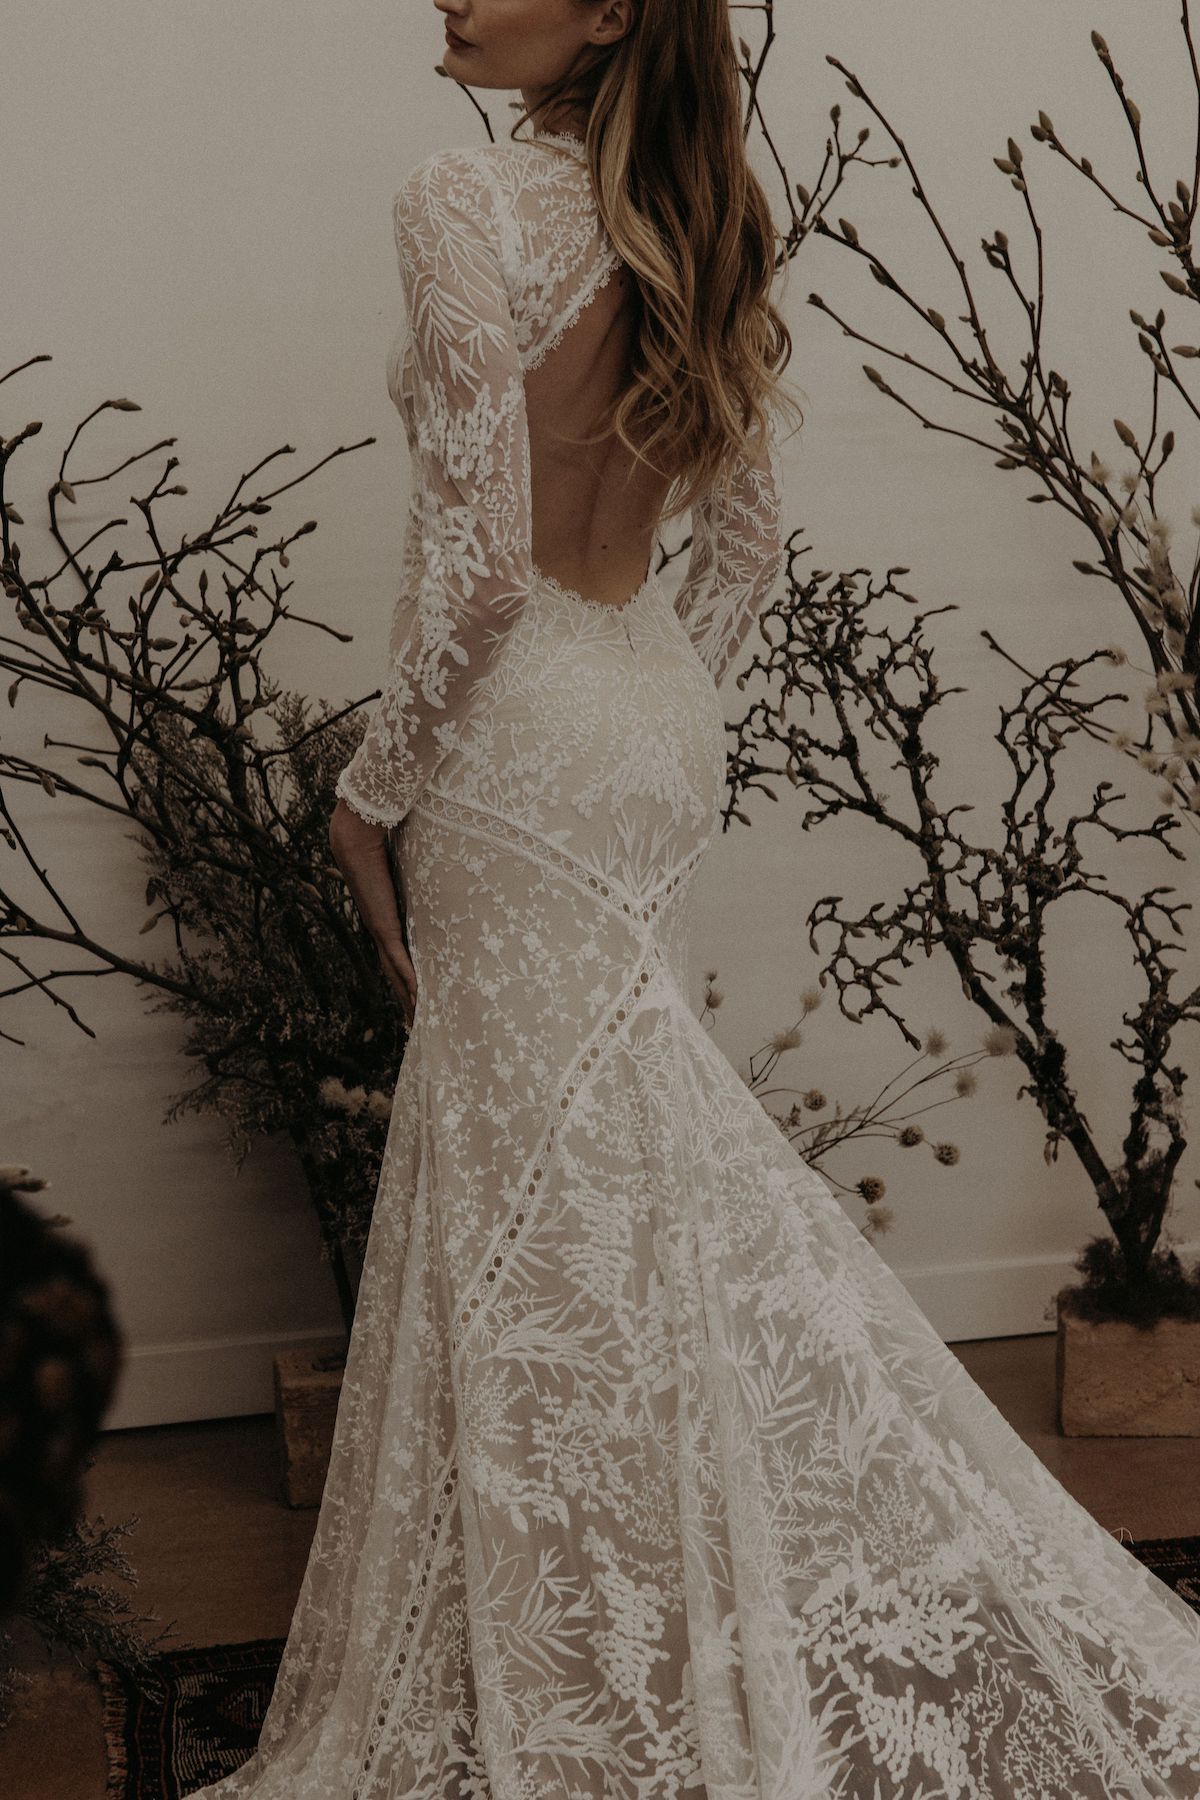 Berta Lace Deep V Wedding Dress With V Neck And Long Sleeves, Backless  Appliques, And Designer Style Perfect For The Modern Bride From  Classicalforever, $203.13 | DHgate.Com